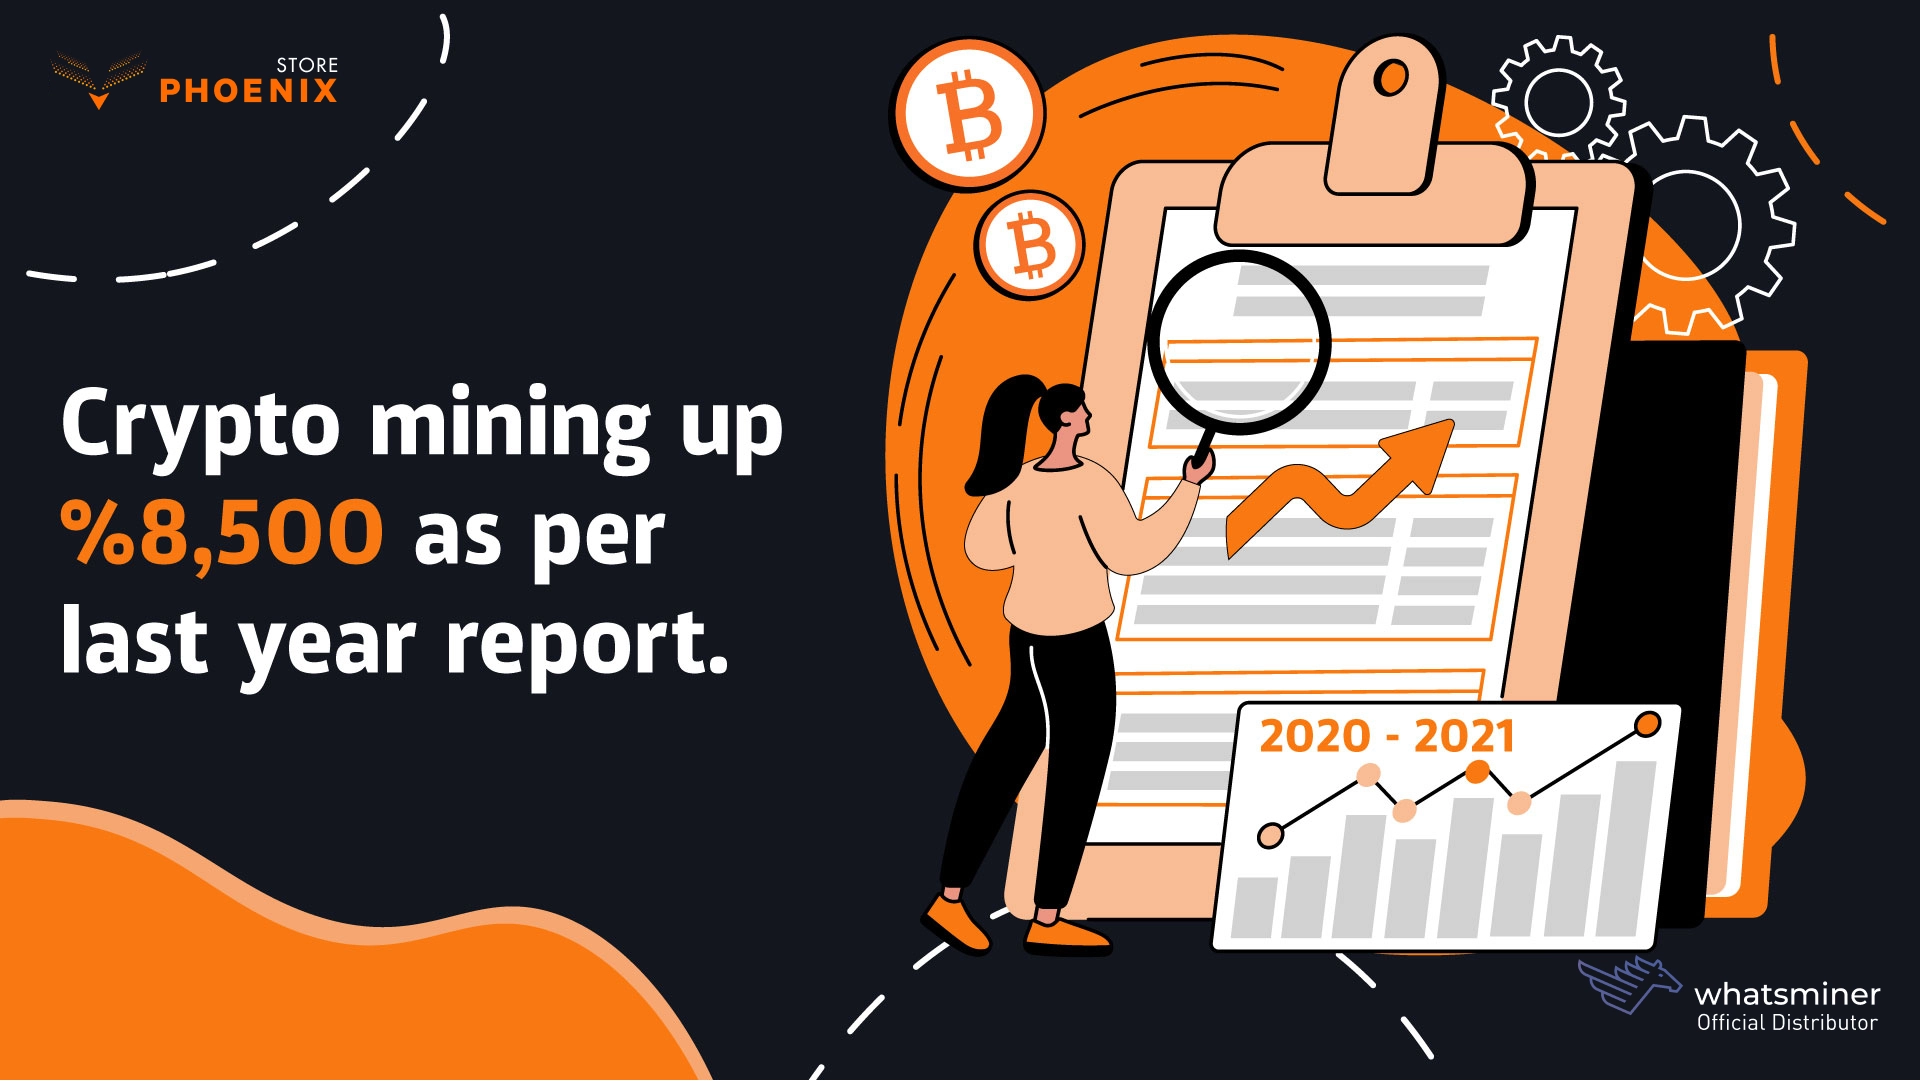 Crypto mining up 8,500% as per last year report